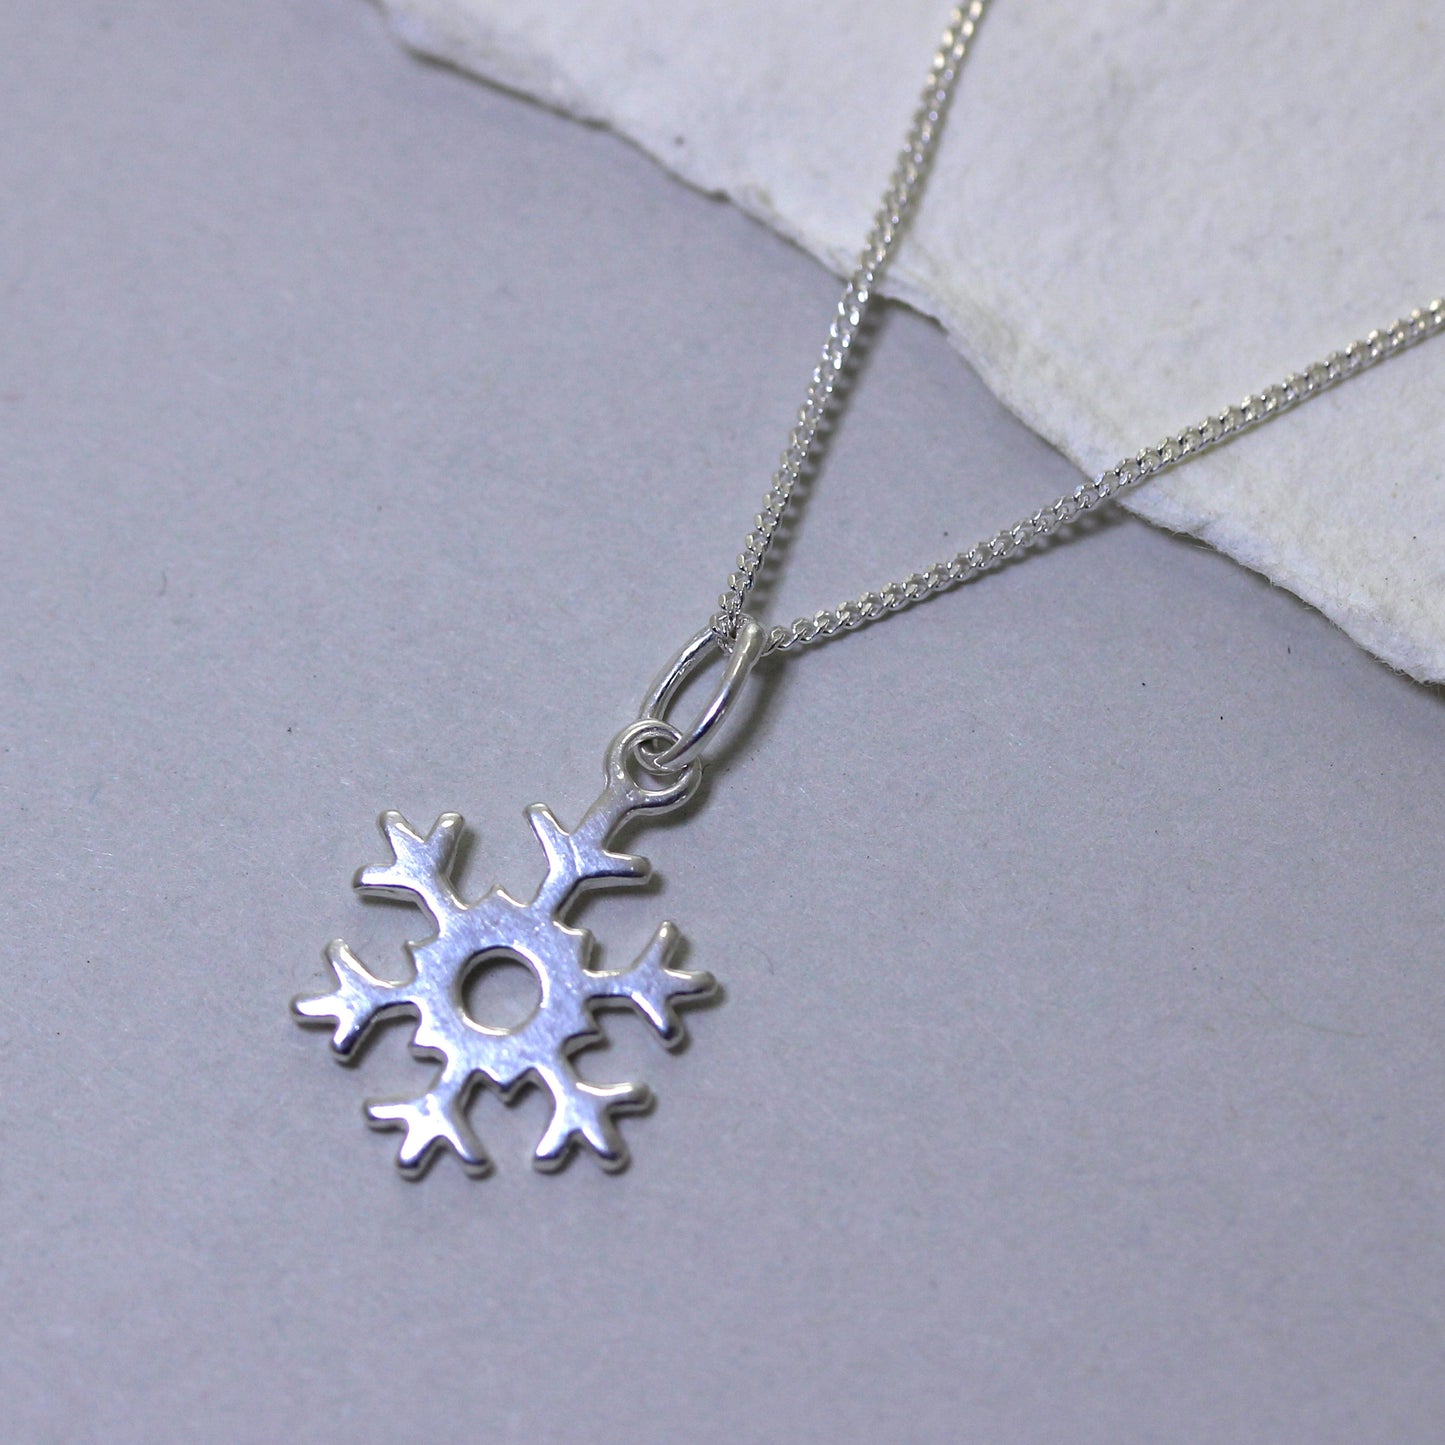 Sterling Silver Snowflake Necklace - 14 - 32 Inches